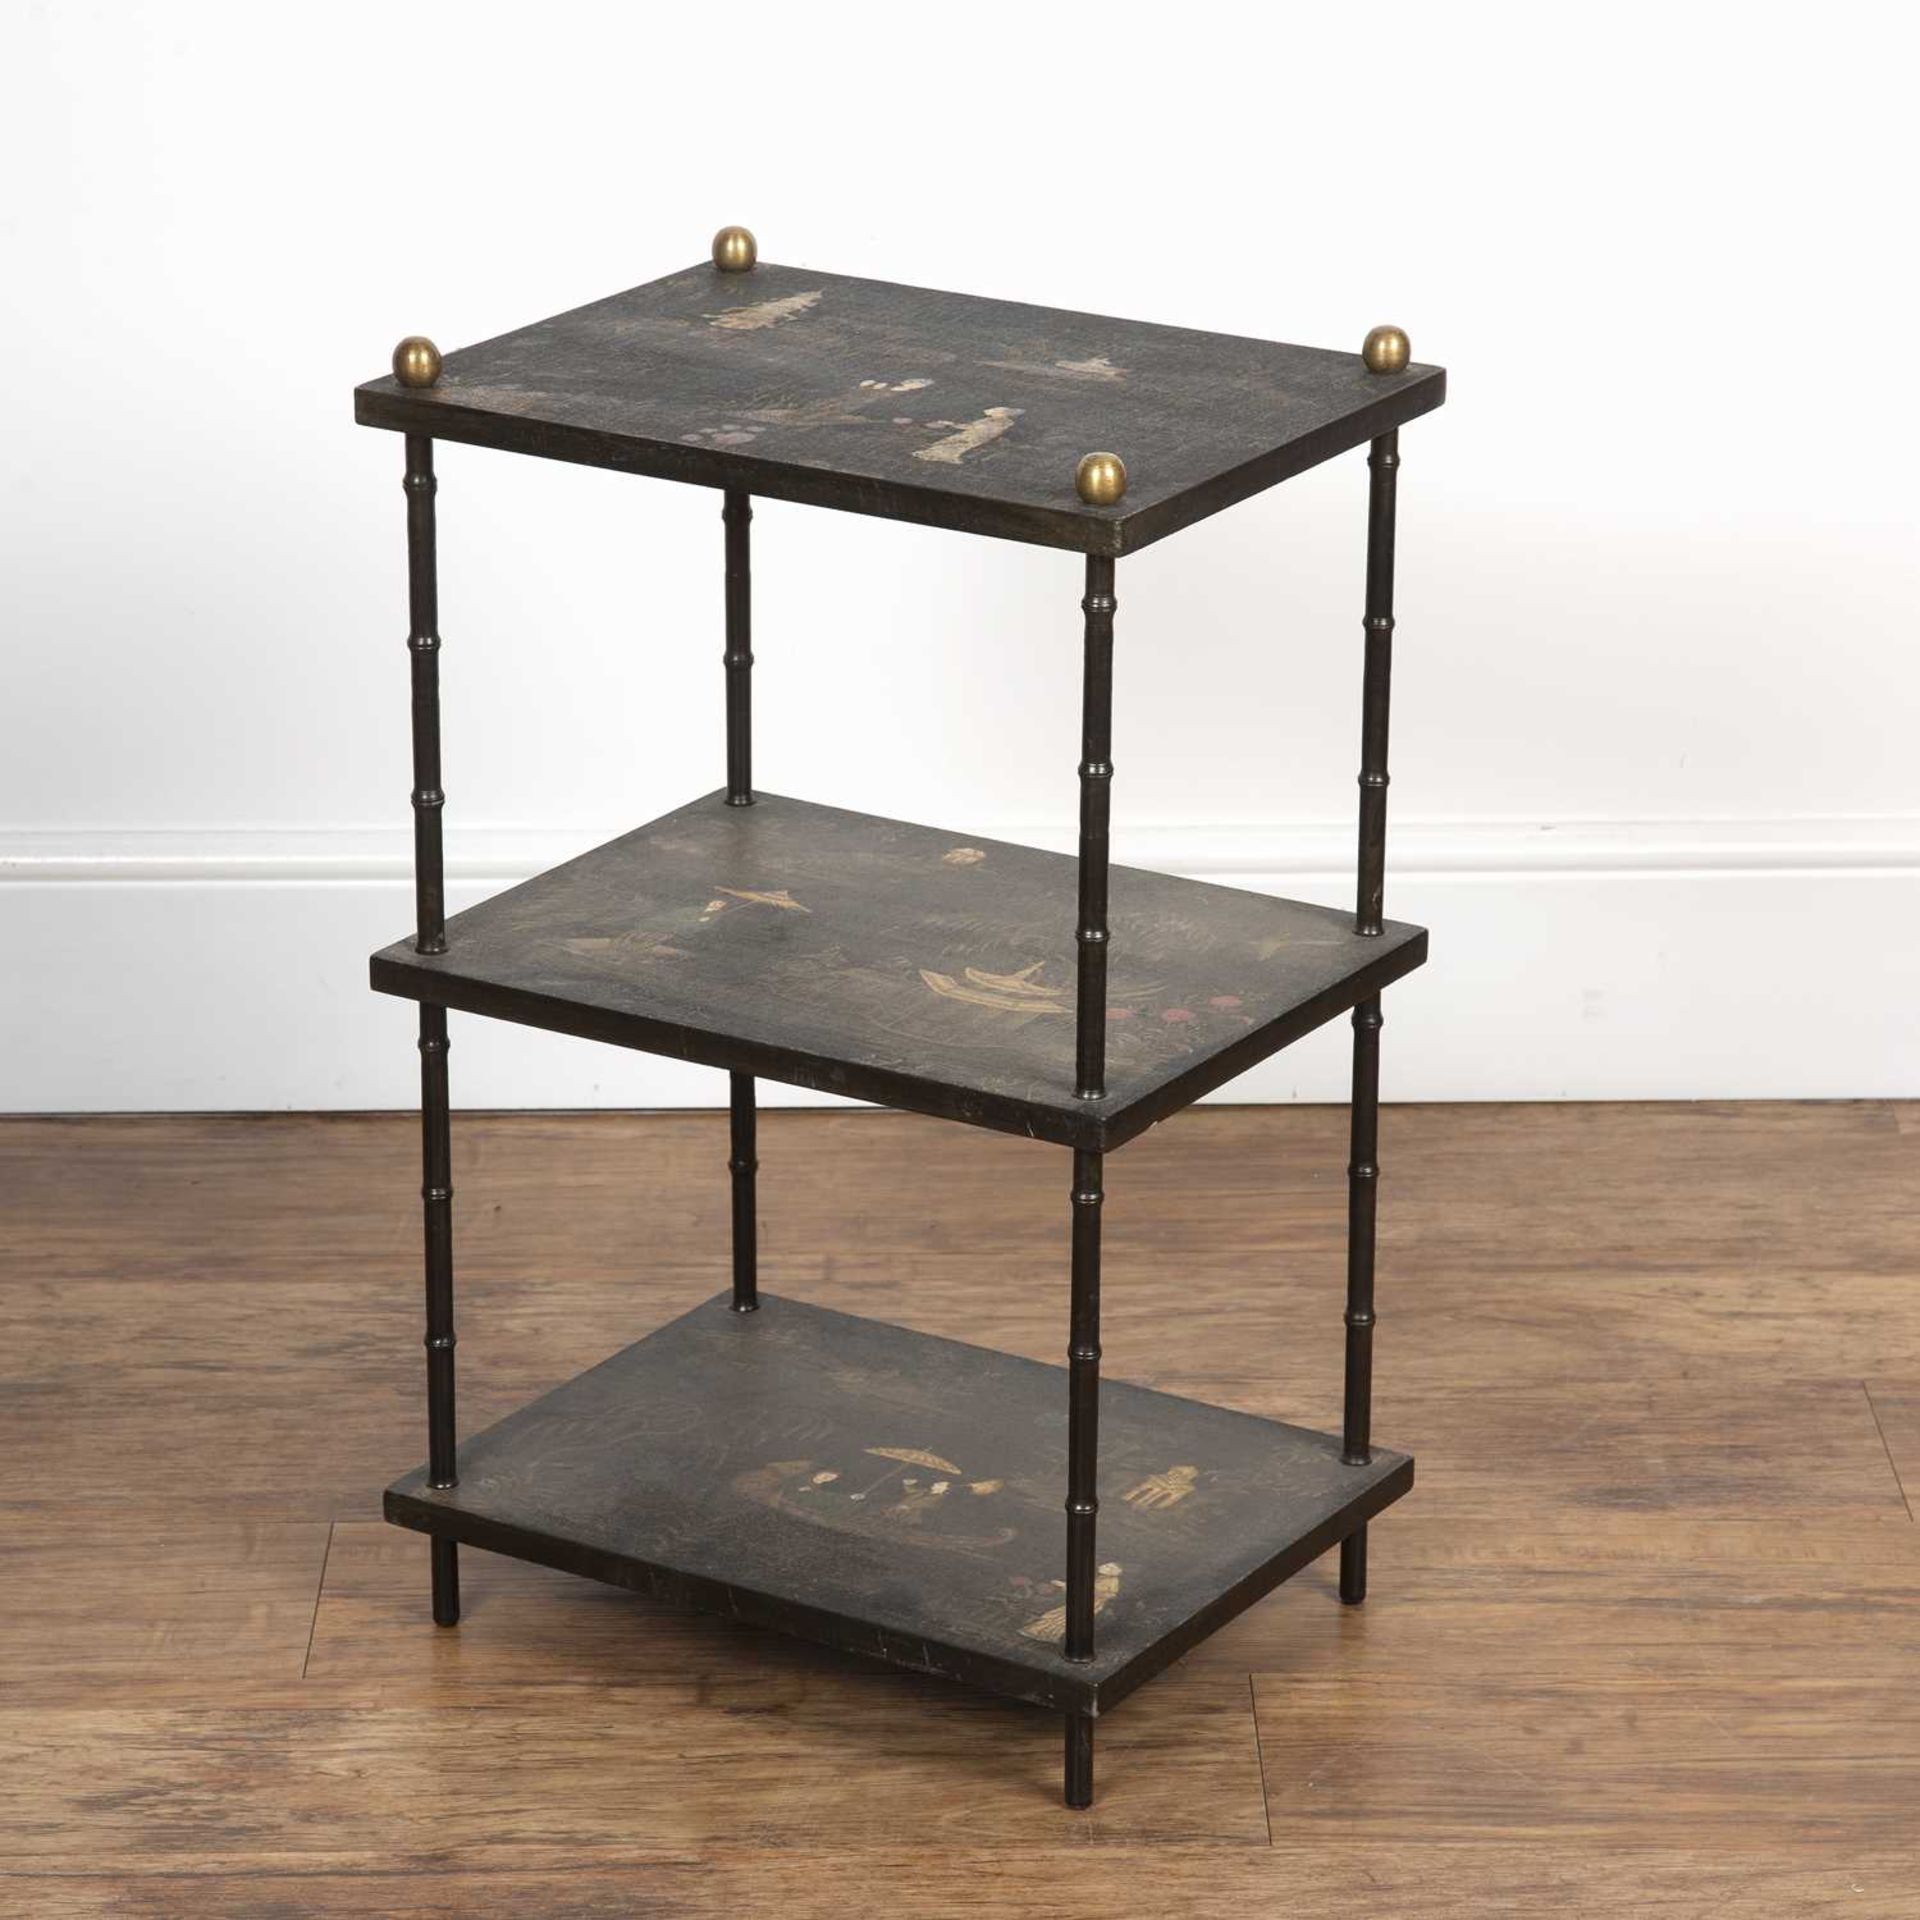 Chinoiserie three tier stand with painted decoration on faux bamboo metal supports, 40.5cm wide x - Image 3 of 4